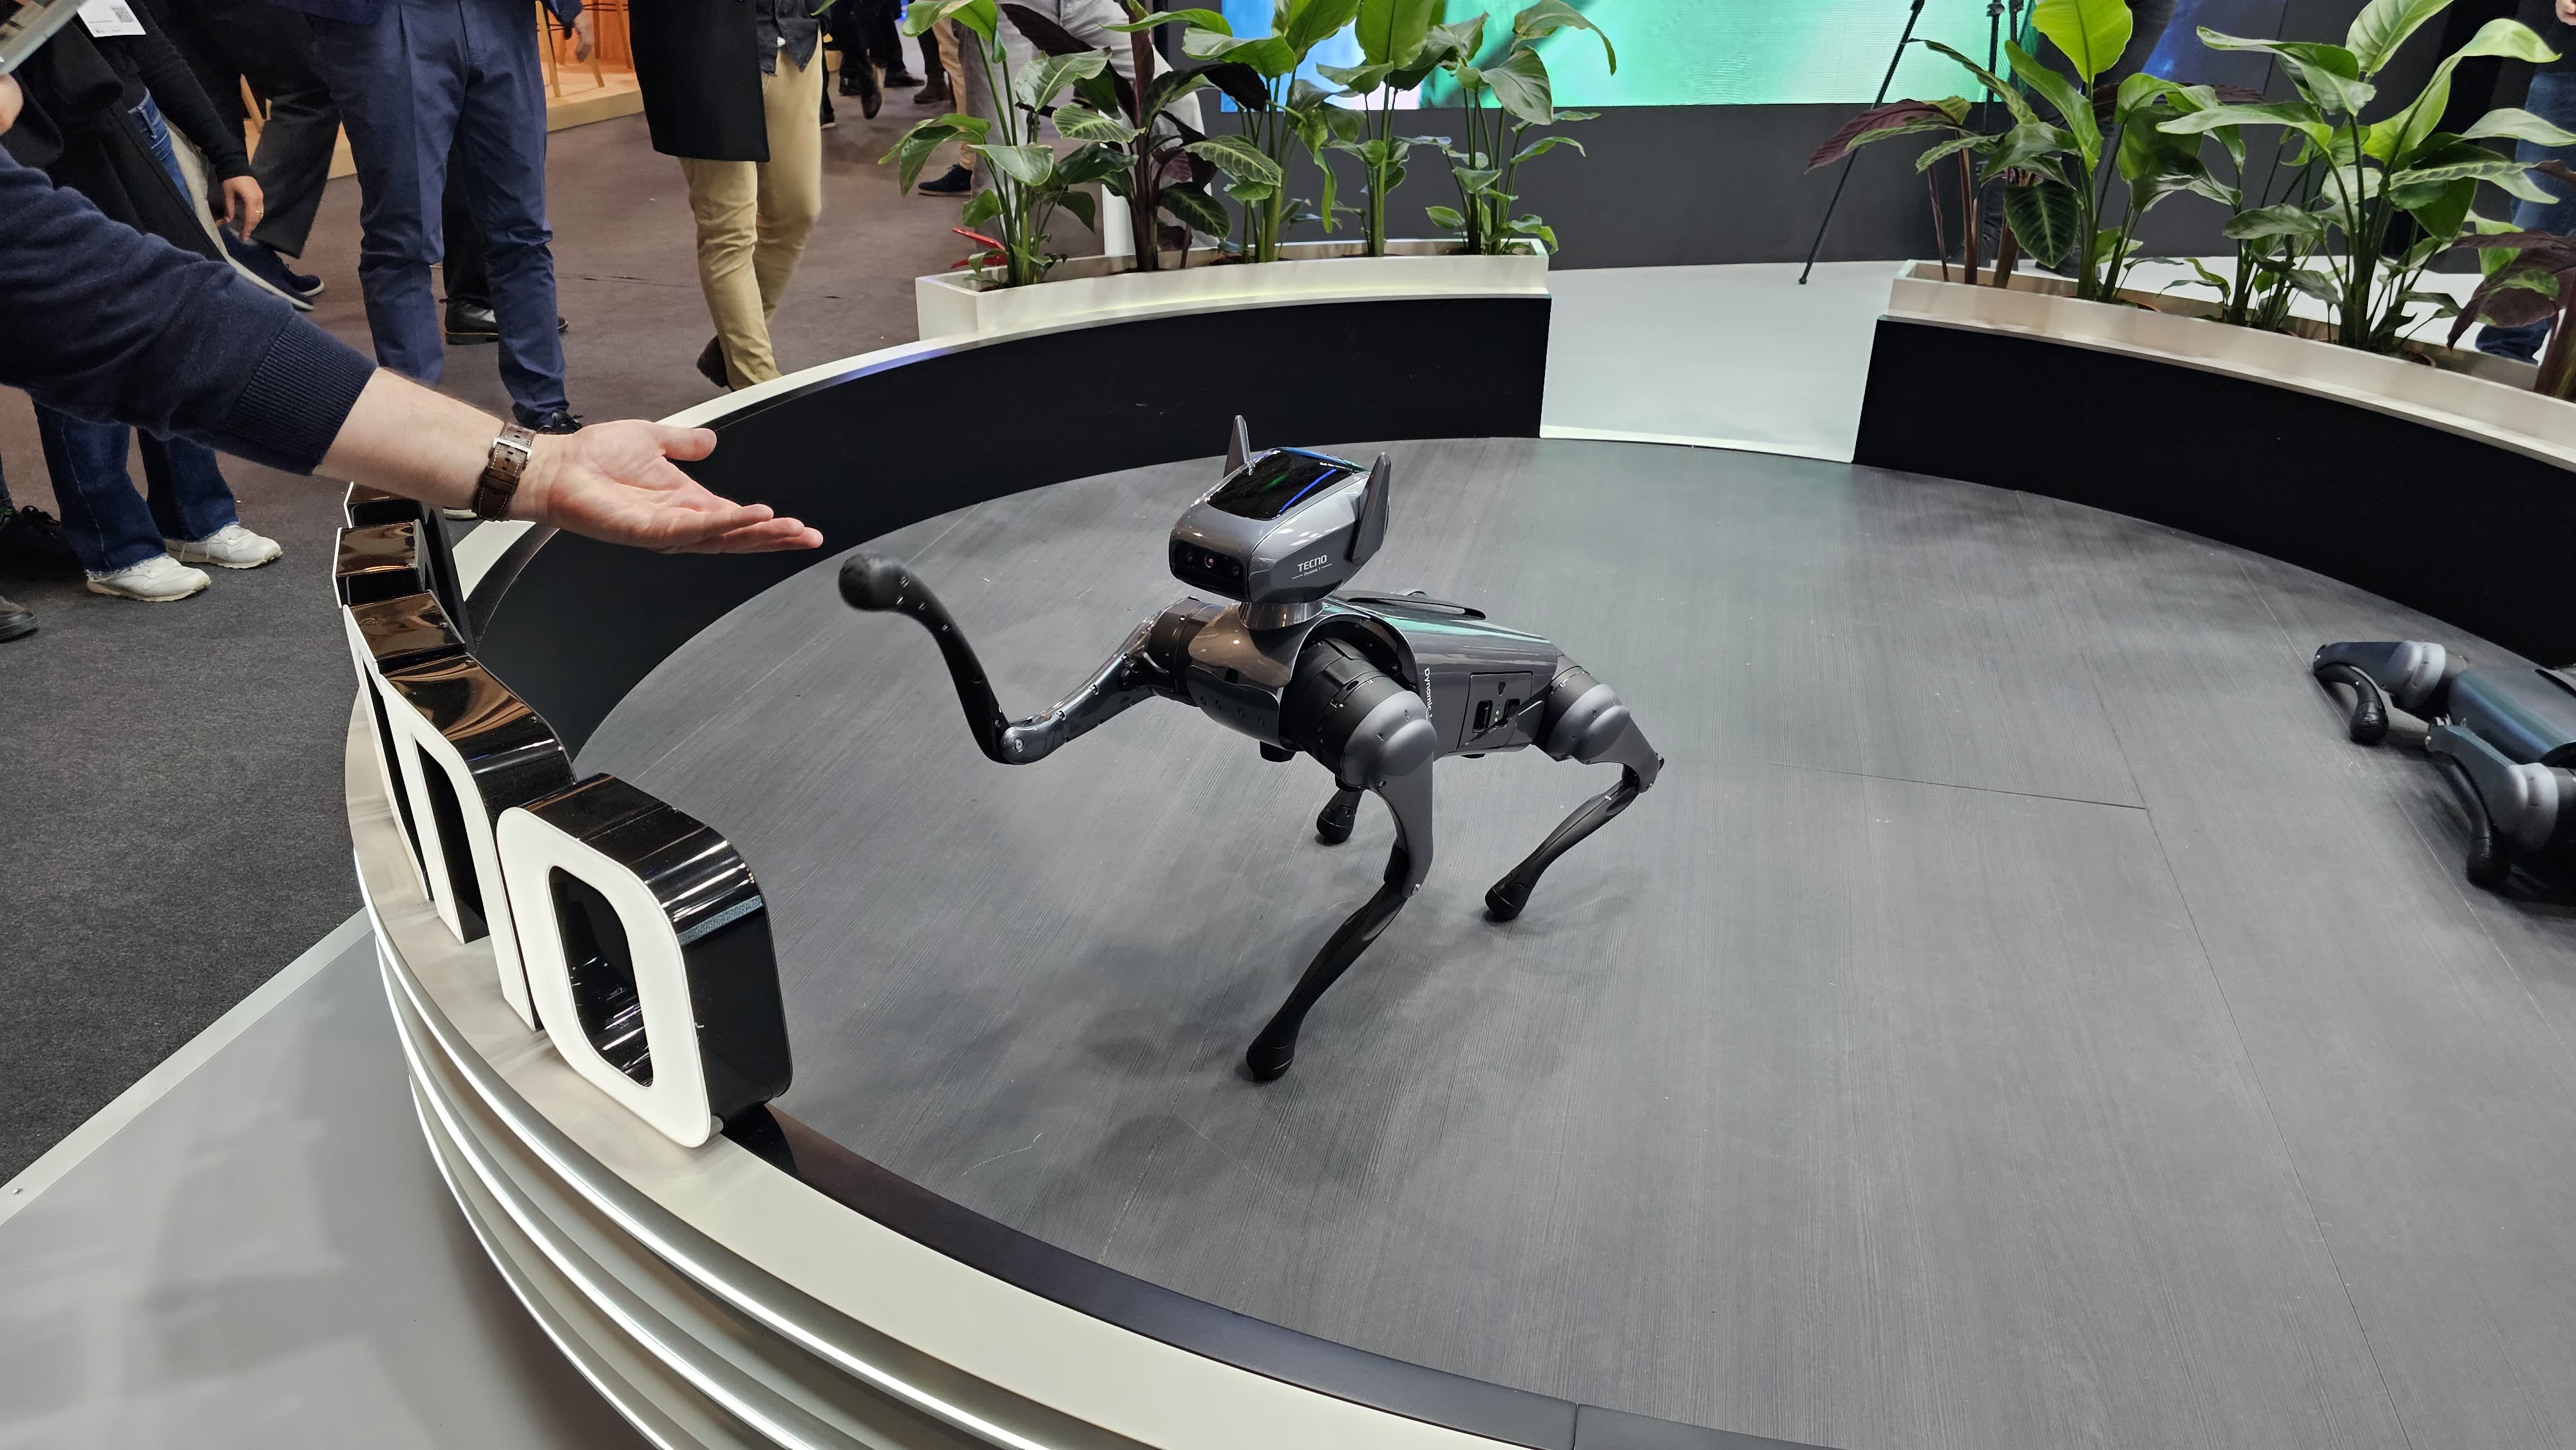 Smart rings, robot dogs, bendable phones